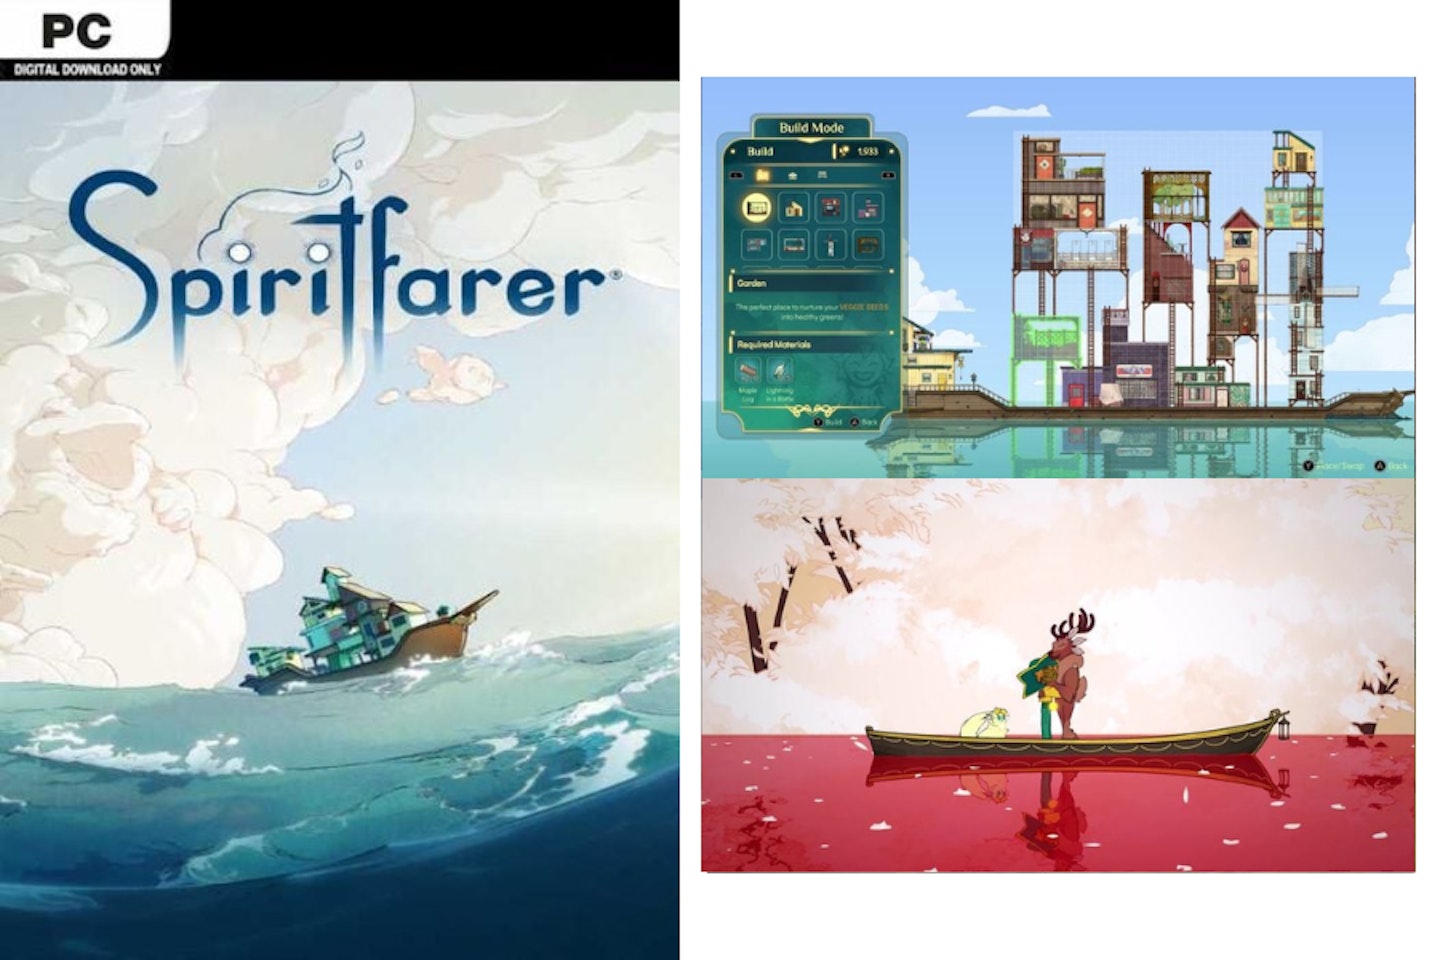 Spiritfarer- one of the best co-op games on PC